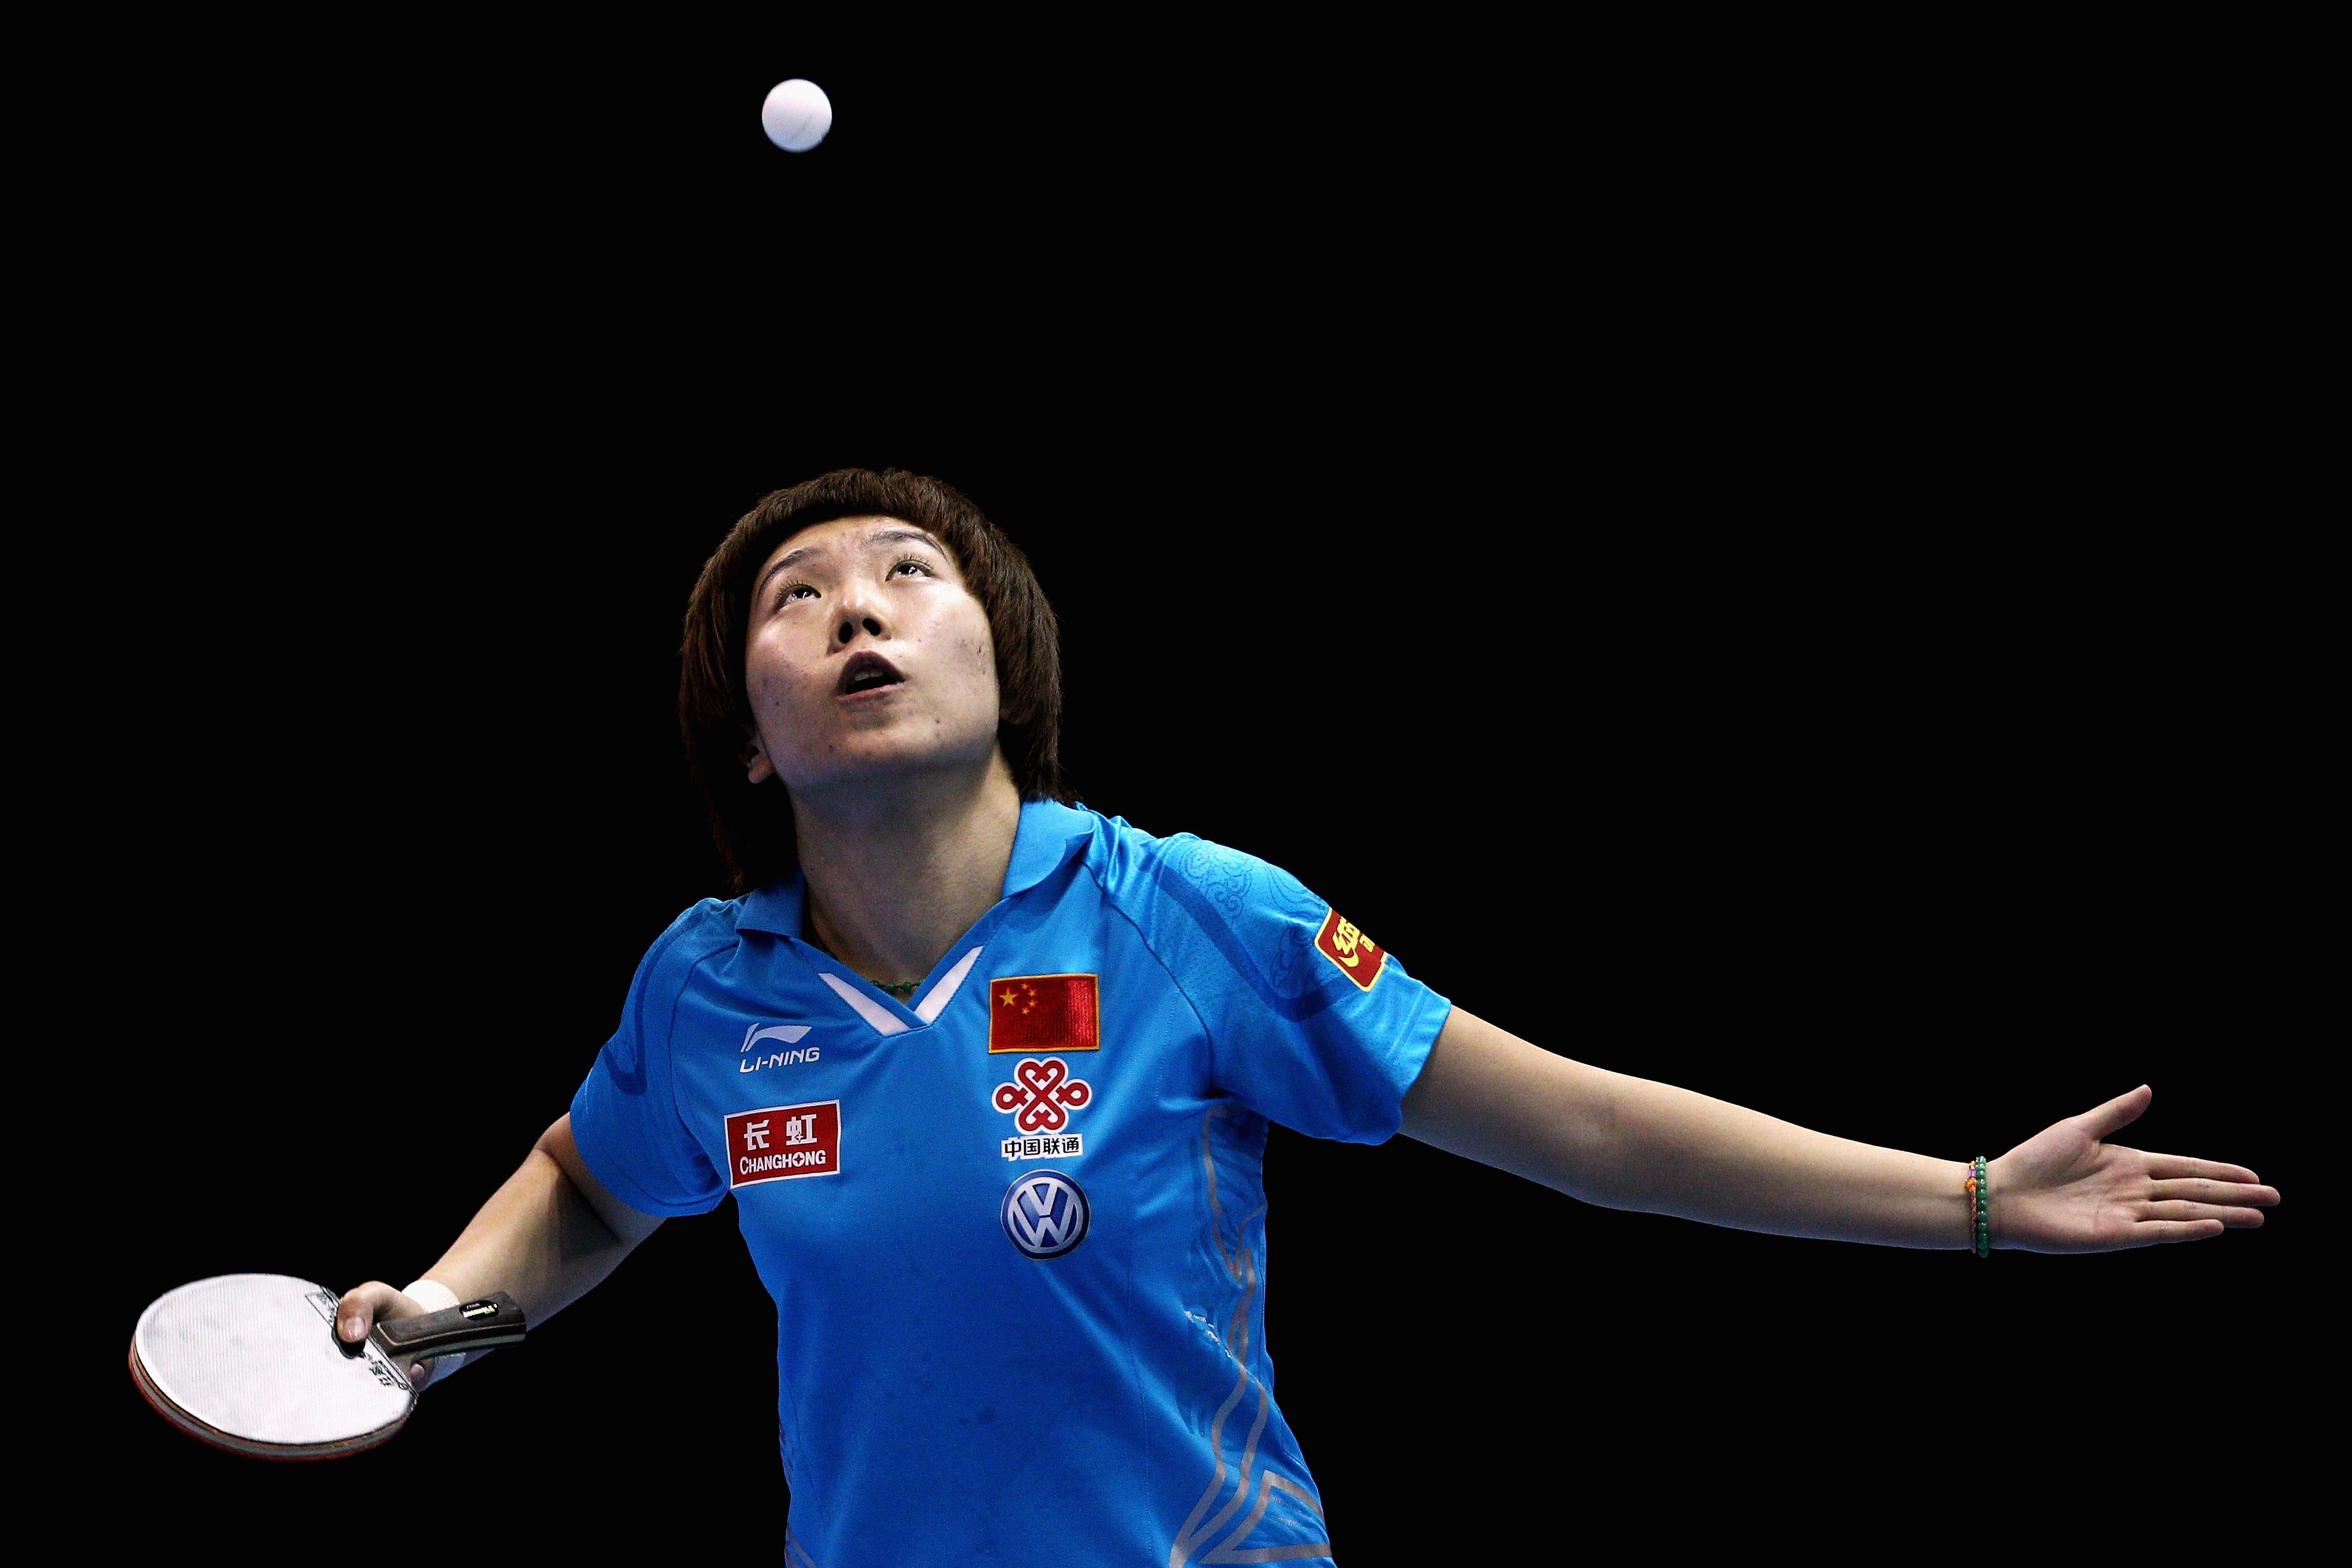 Why China Is so Good at Table Tennis